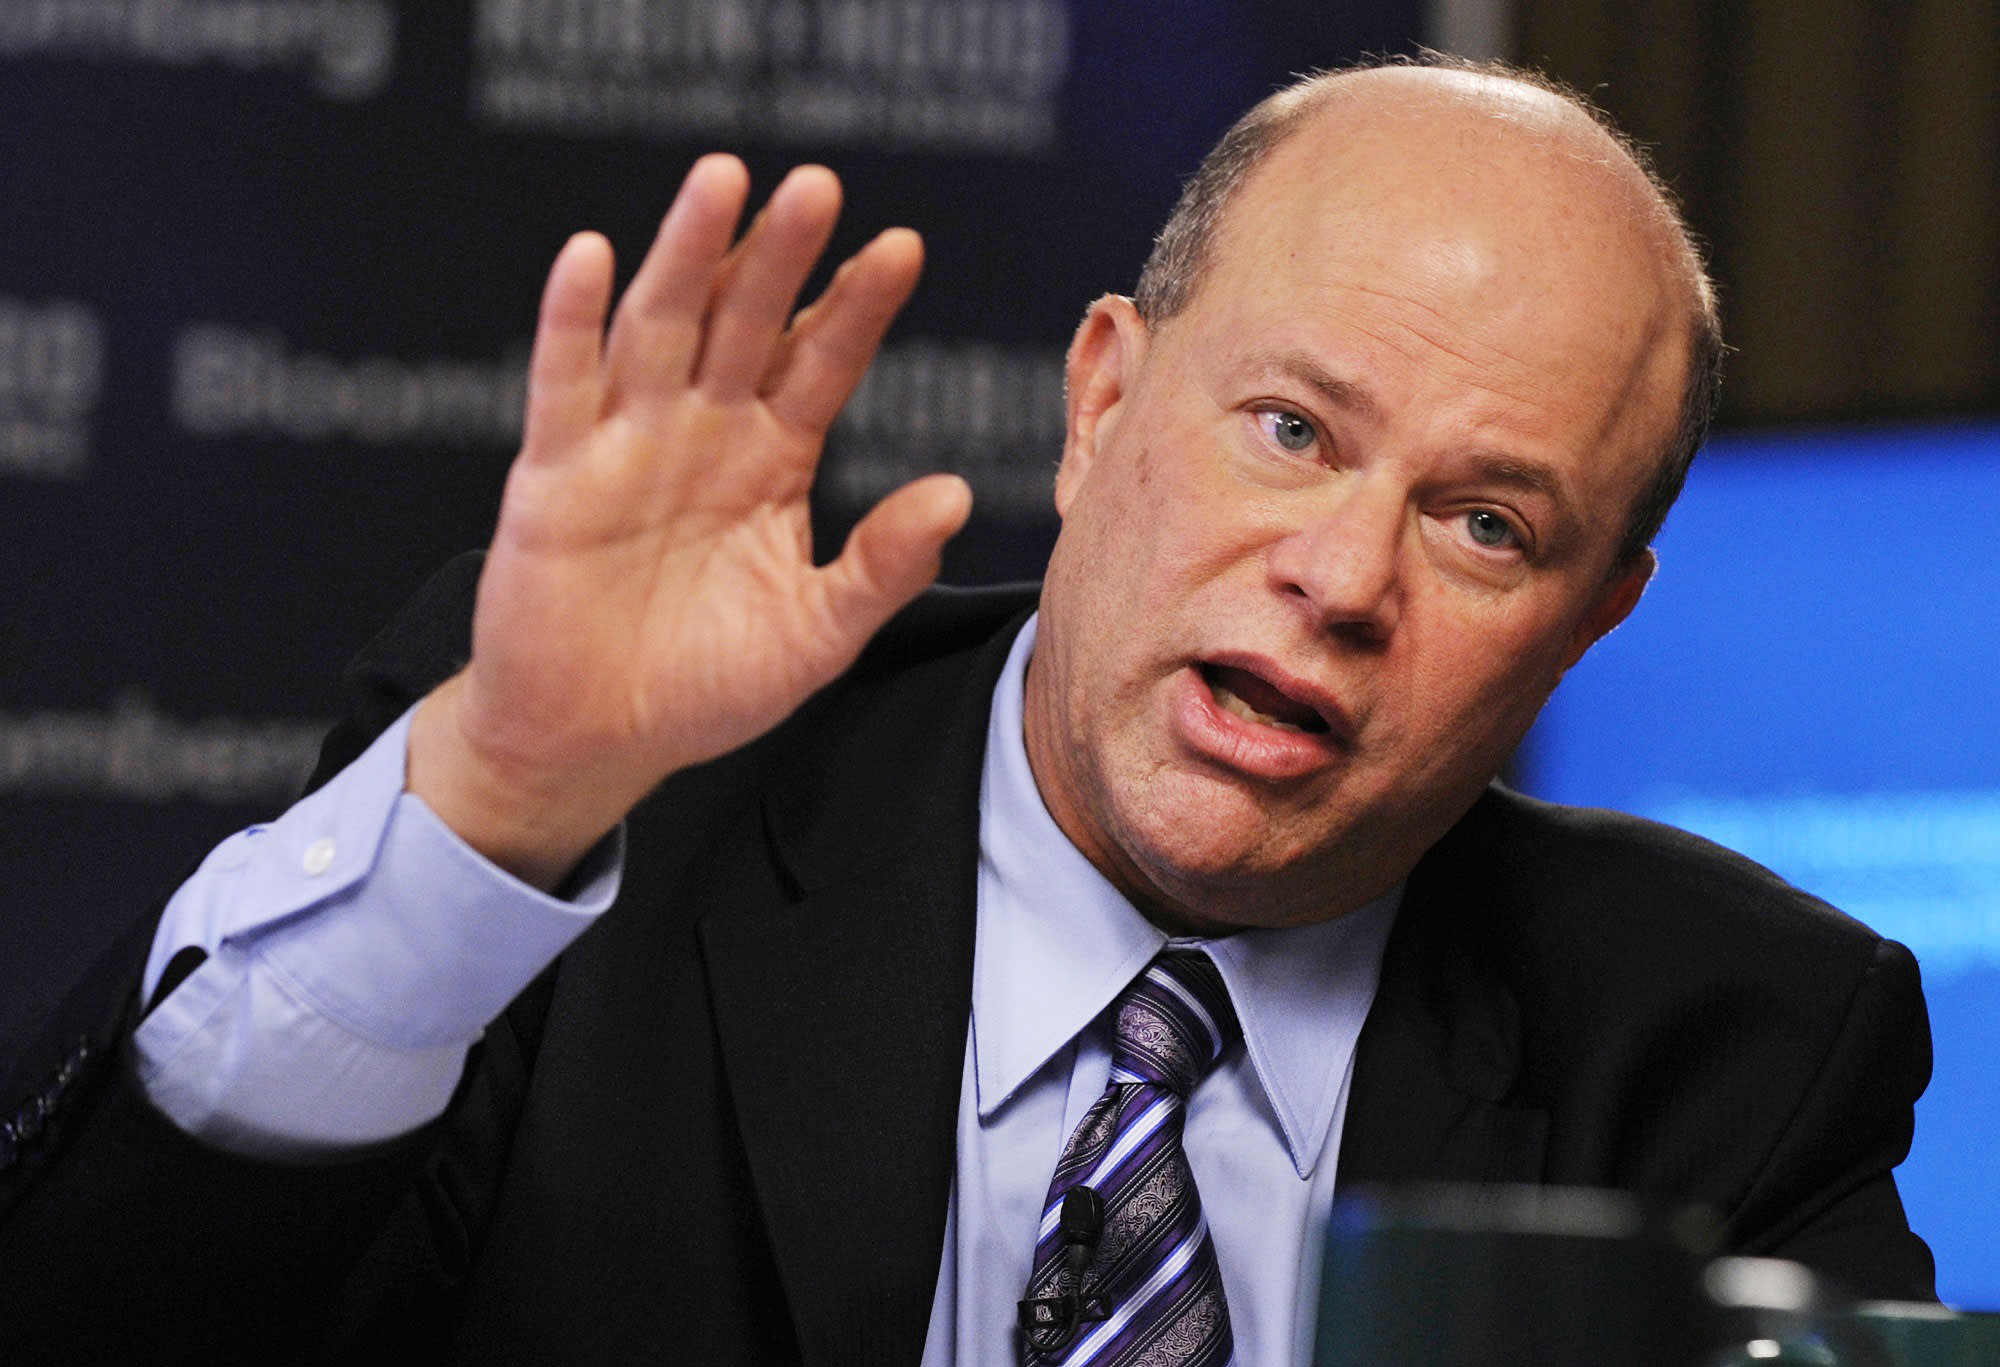 According to David Tepper, be wary of playing this speculative market game, noting that it did not end well in 1999